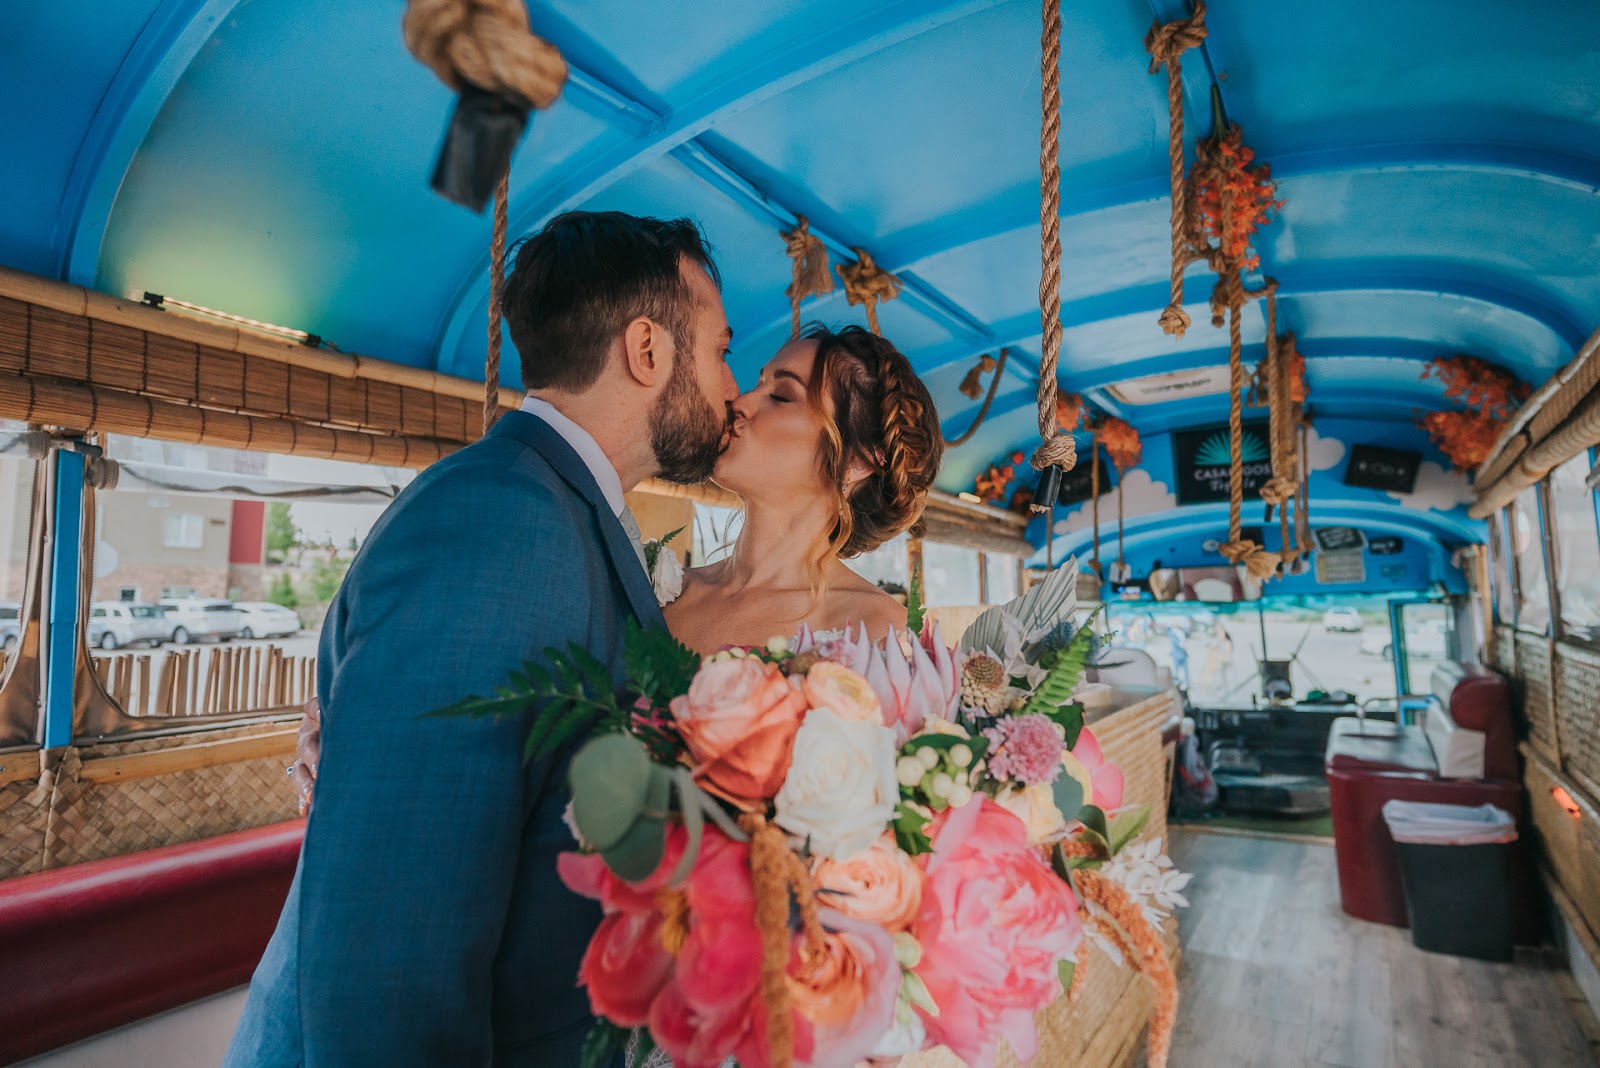 wedding couple kissing in an aesthetic wedding venues of a decorated bus